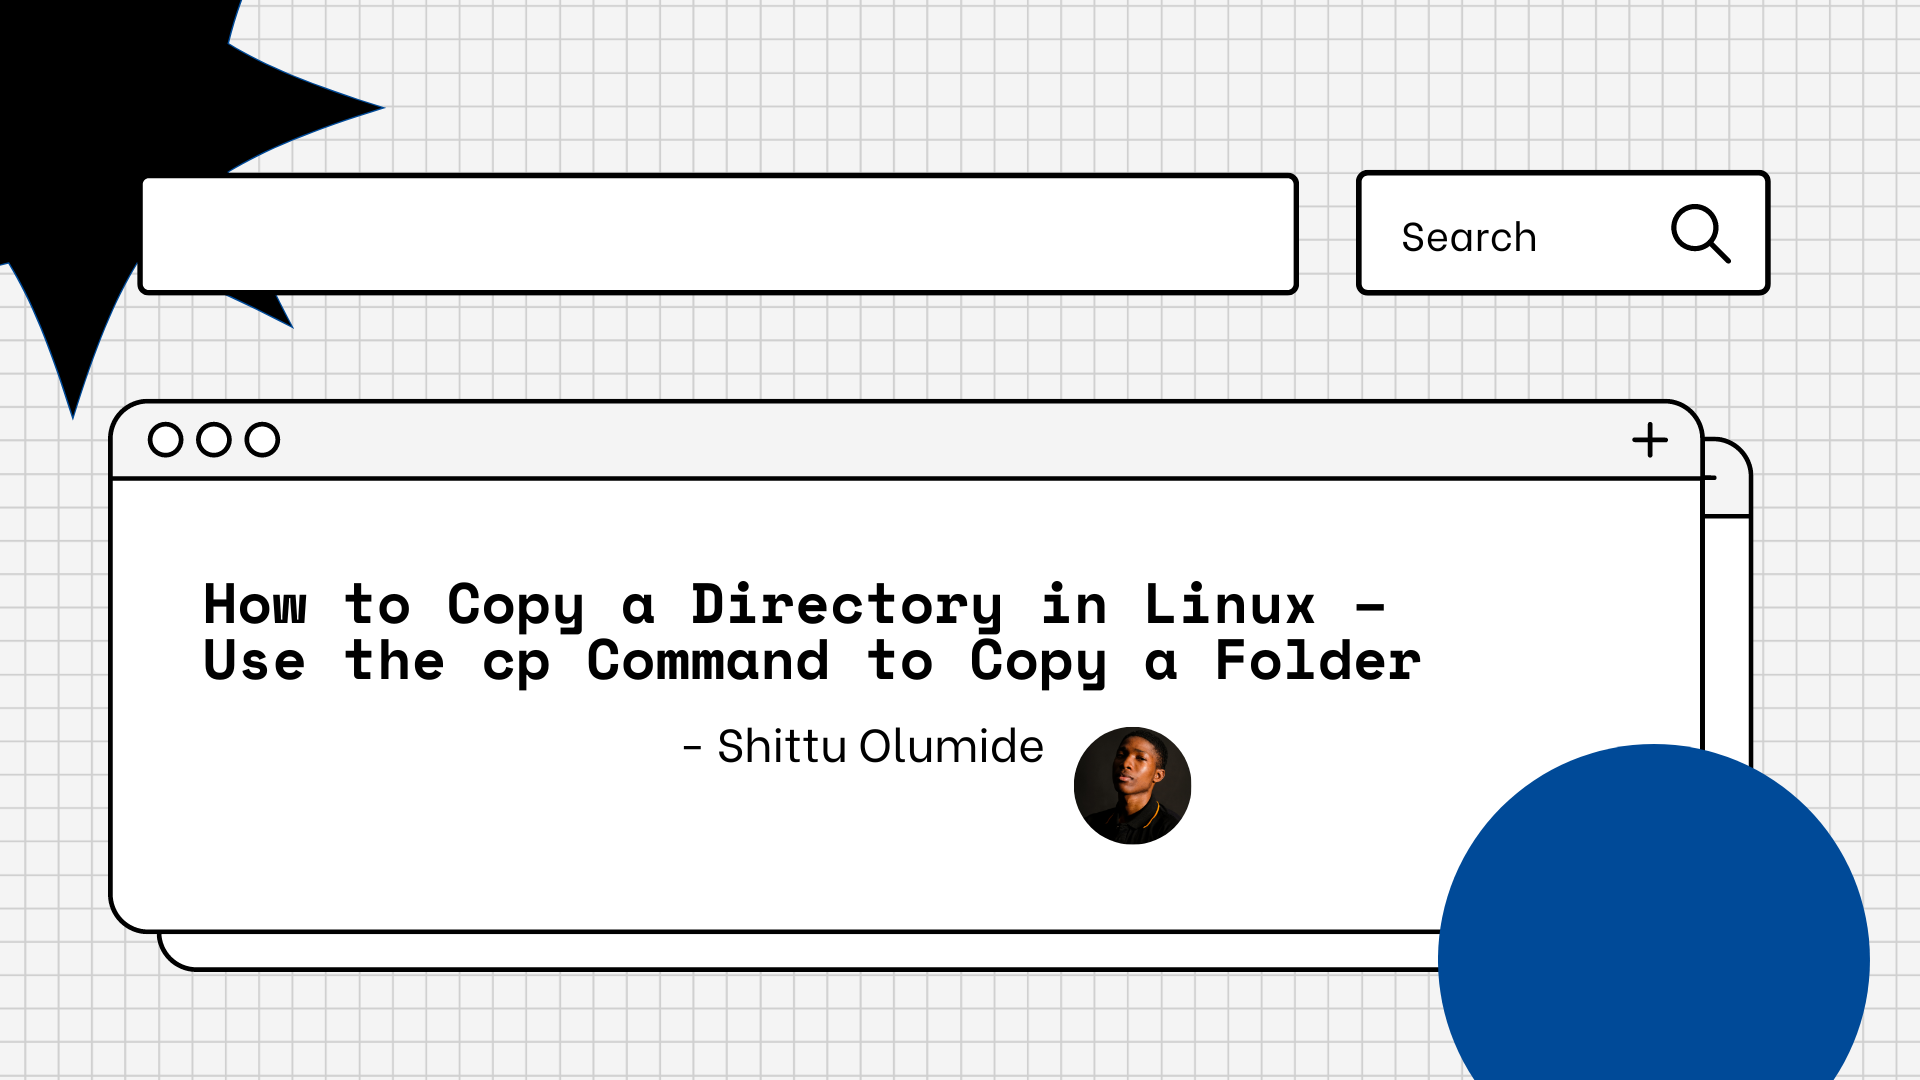 How to Copy a Directory in Linux – Use the cp Command to Copy a Folder